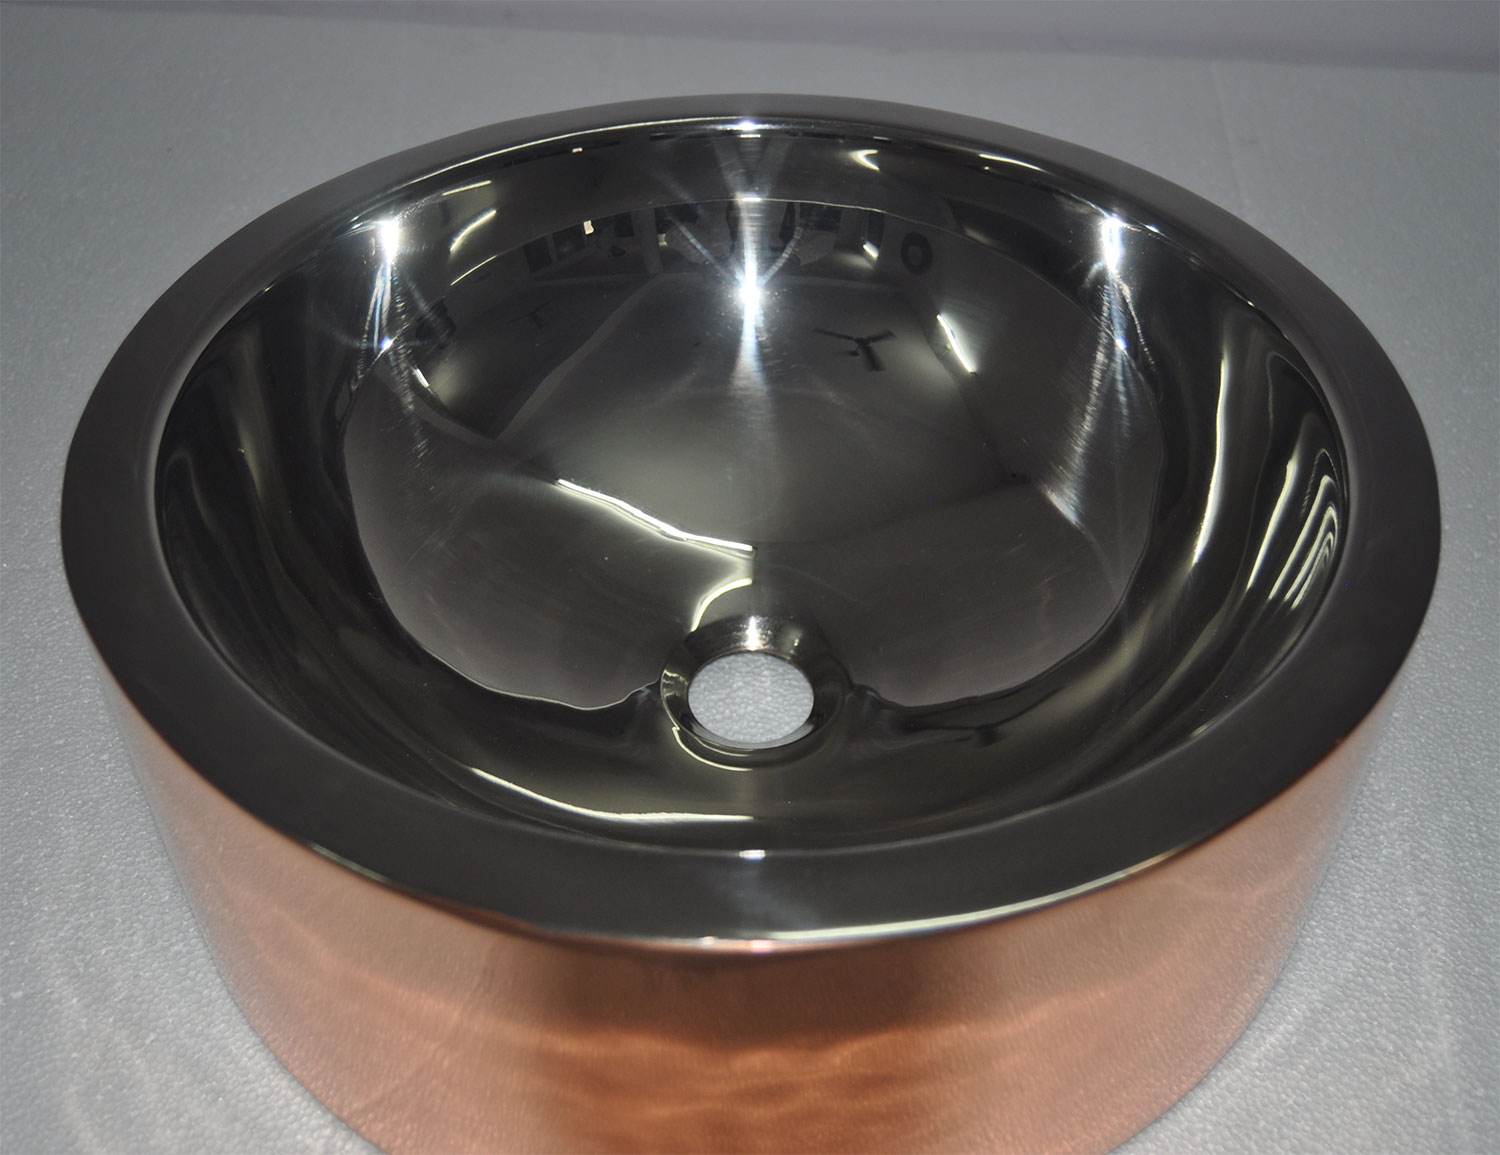 Details About Copper Sink With Nickel Interior And Shiny Copper Outside